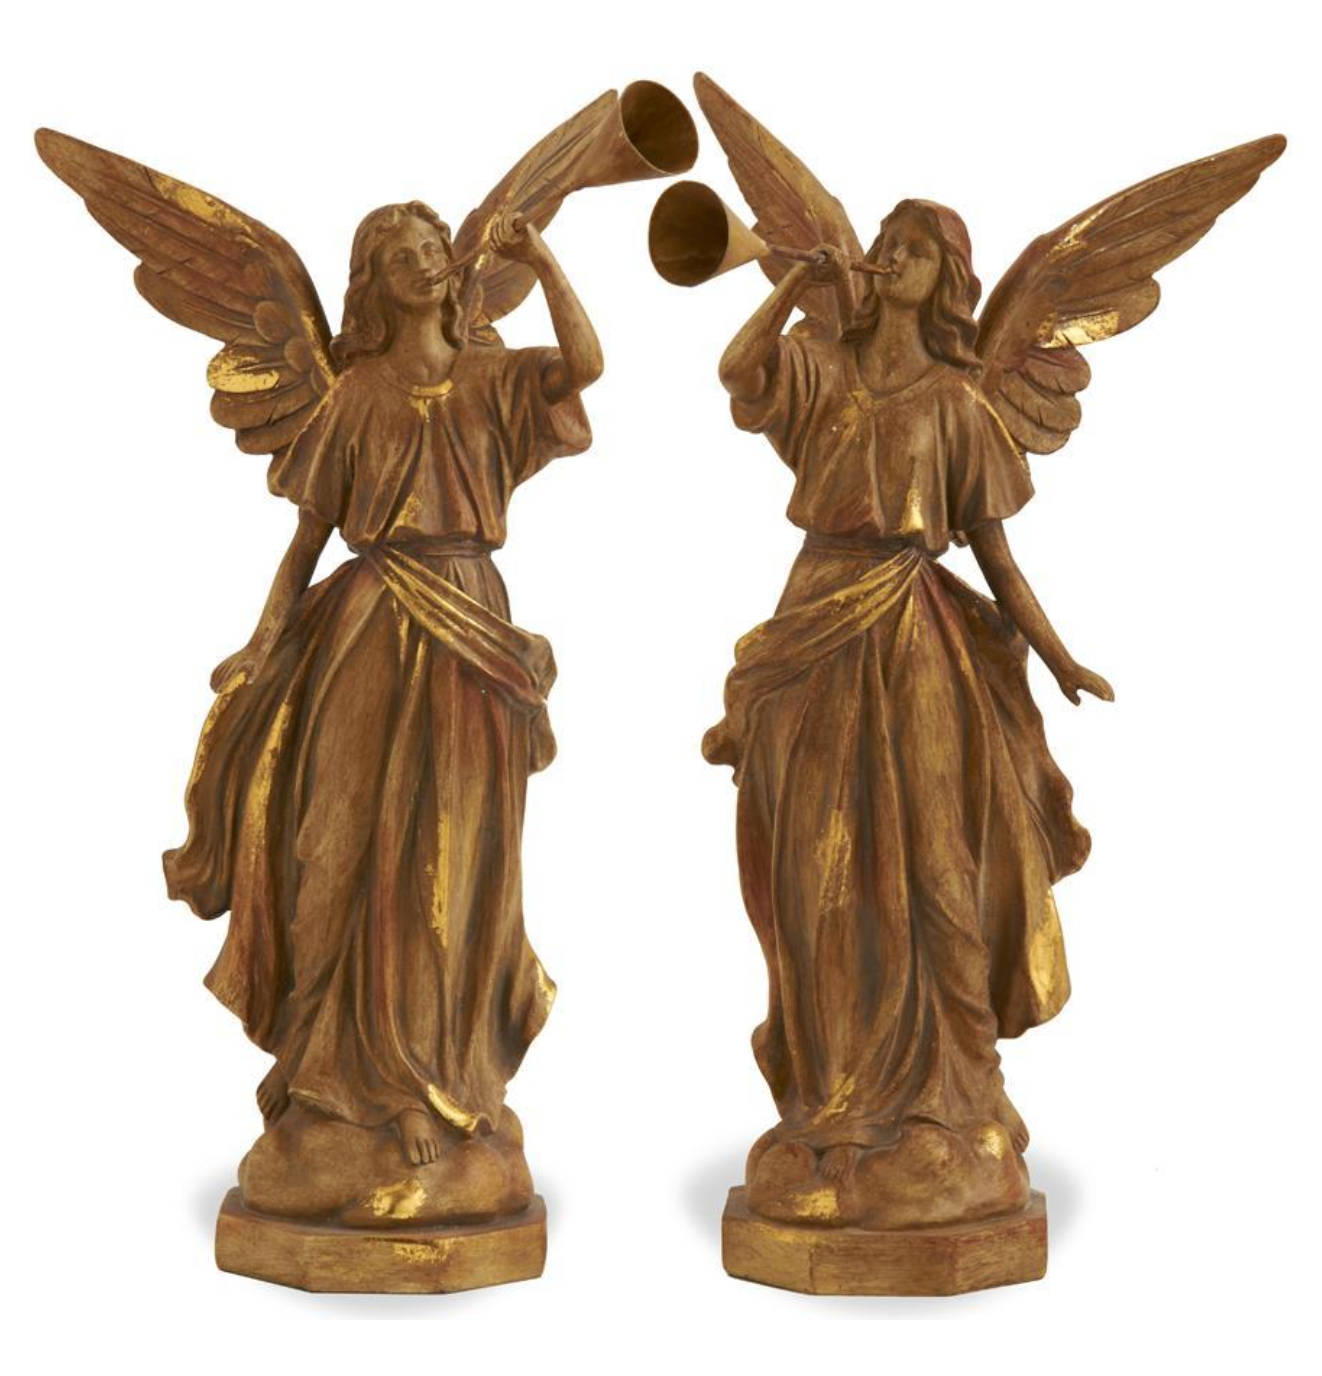 Gold Angels Playing Trumpets - Set of 2